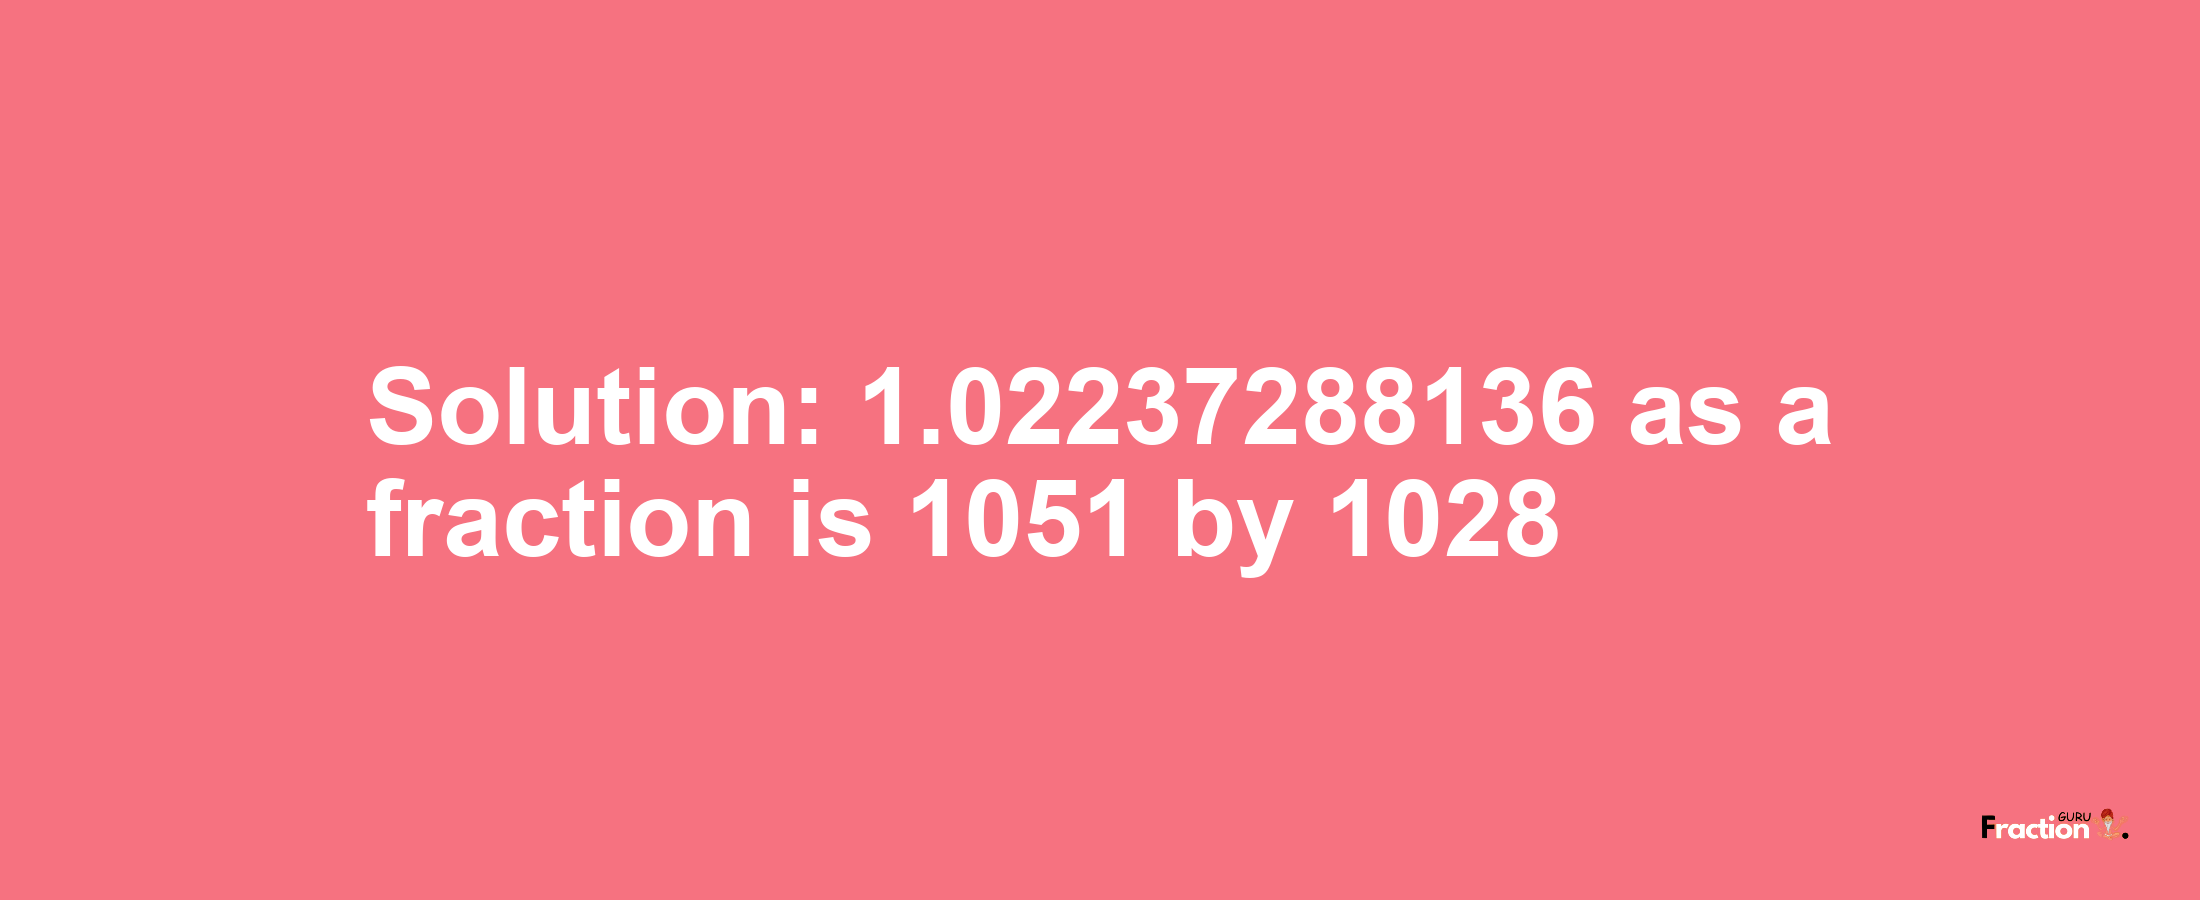 Solution:1.02237288136 as a fraction is 1051/1028